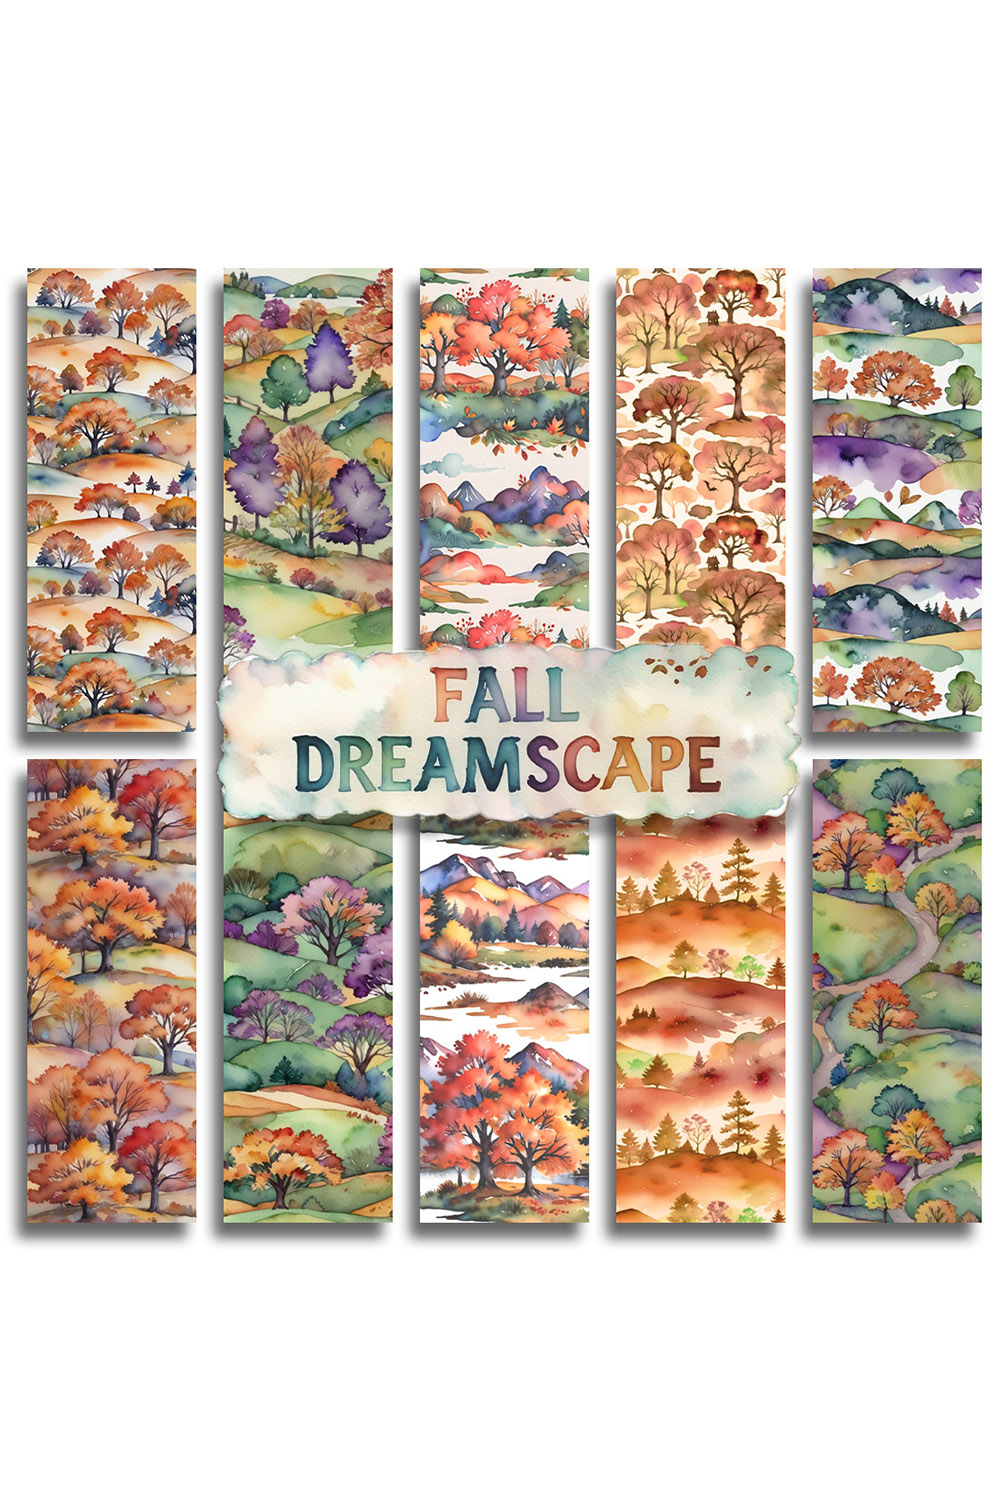 Fall Dreamscape: Seamless Autumn Patterns pinterest preview image.